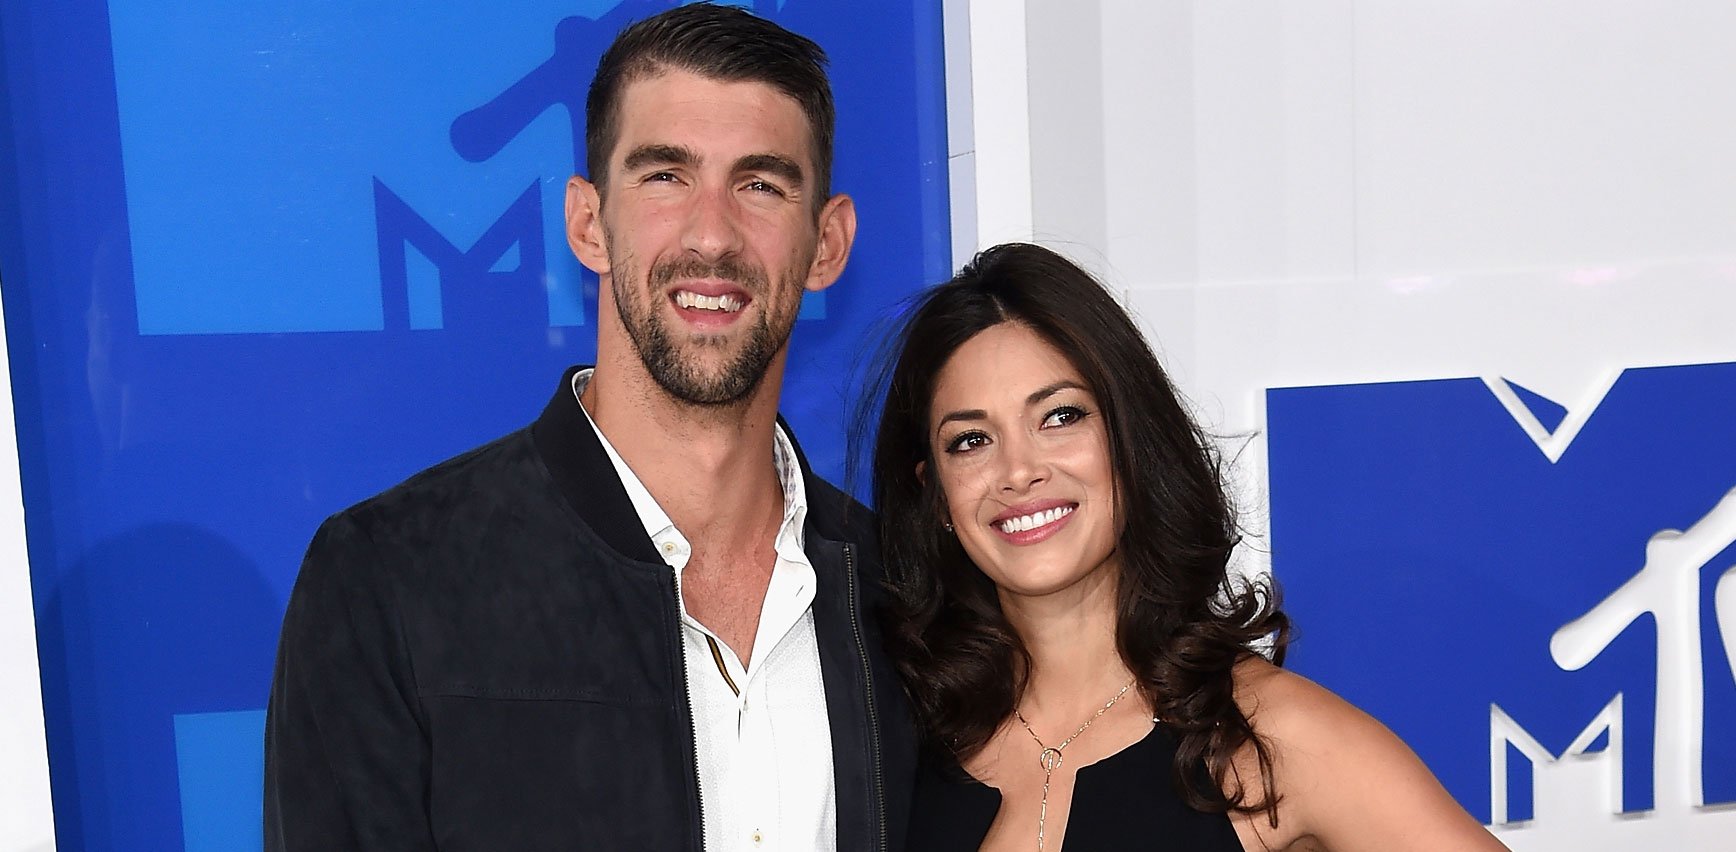 Michael Phelps Has Been Secretly Married for Months!